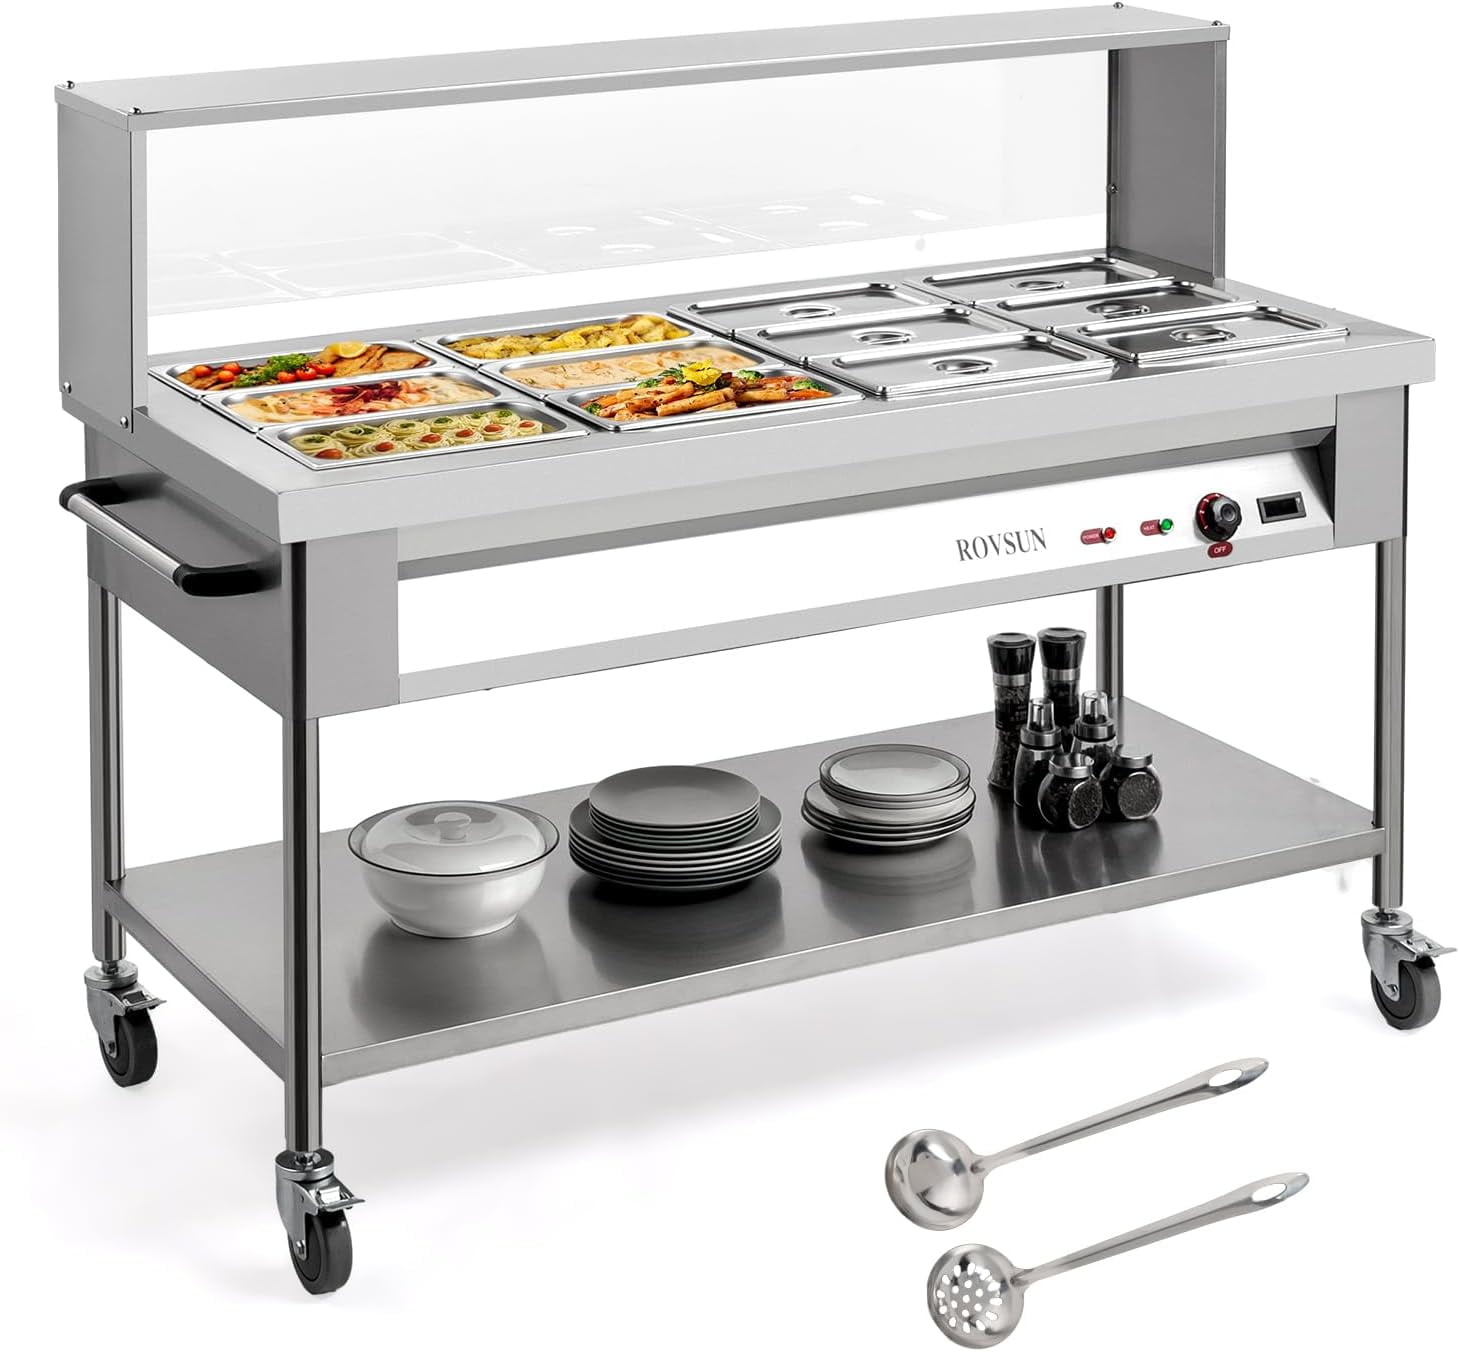 4.5 QT Electric 3 Pan Buffet Server and Warming Tray – R & B Import